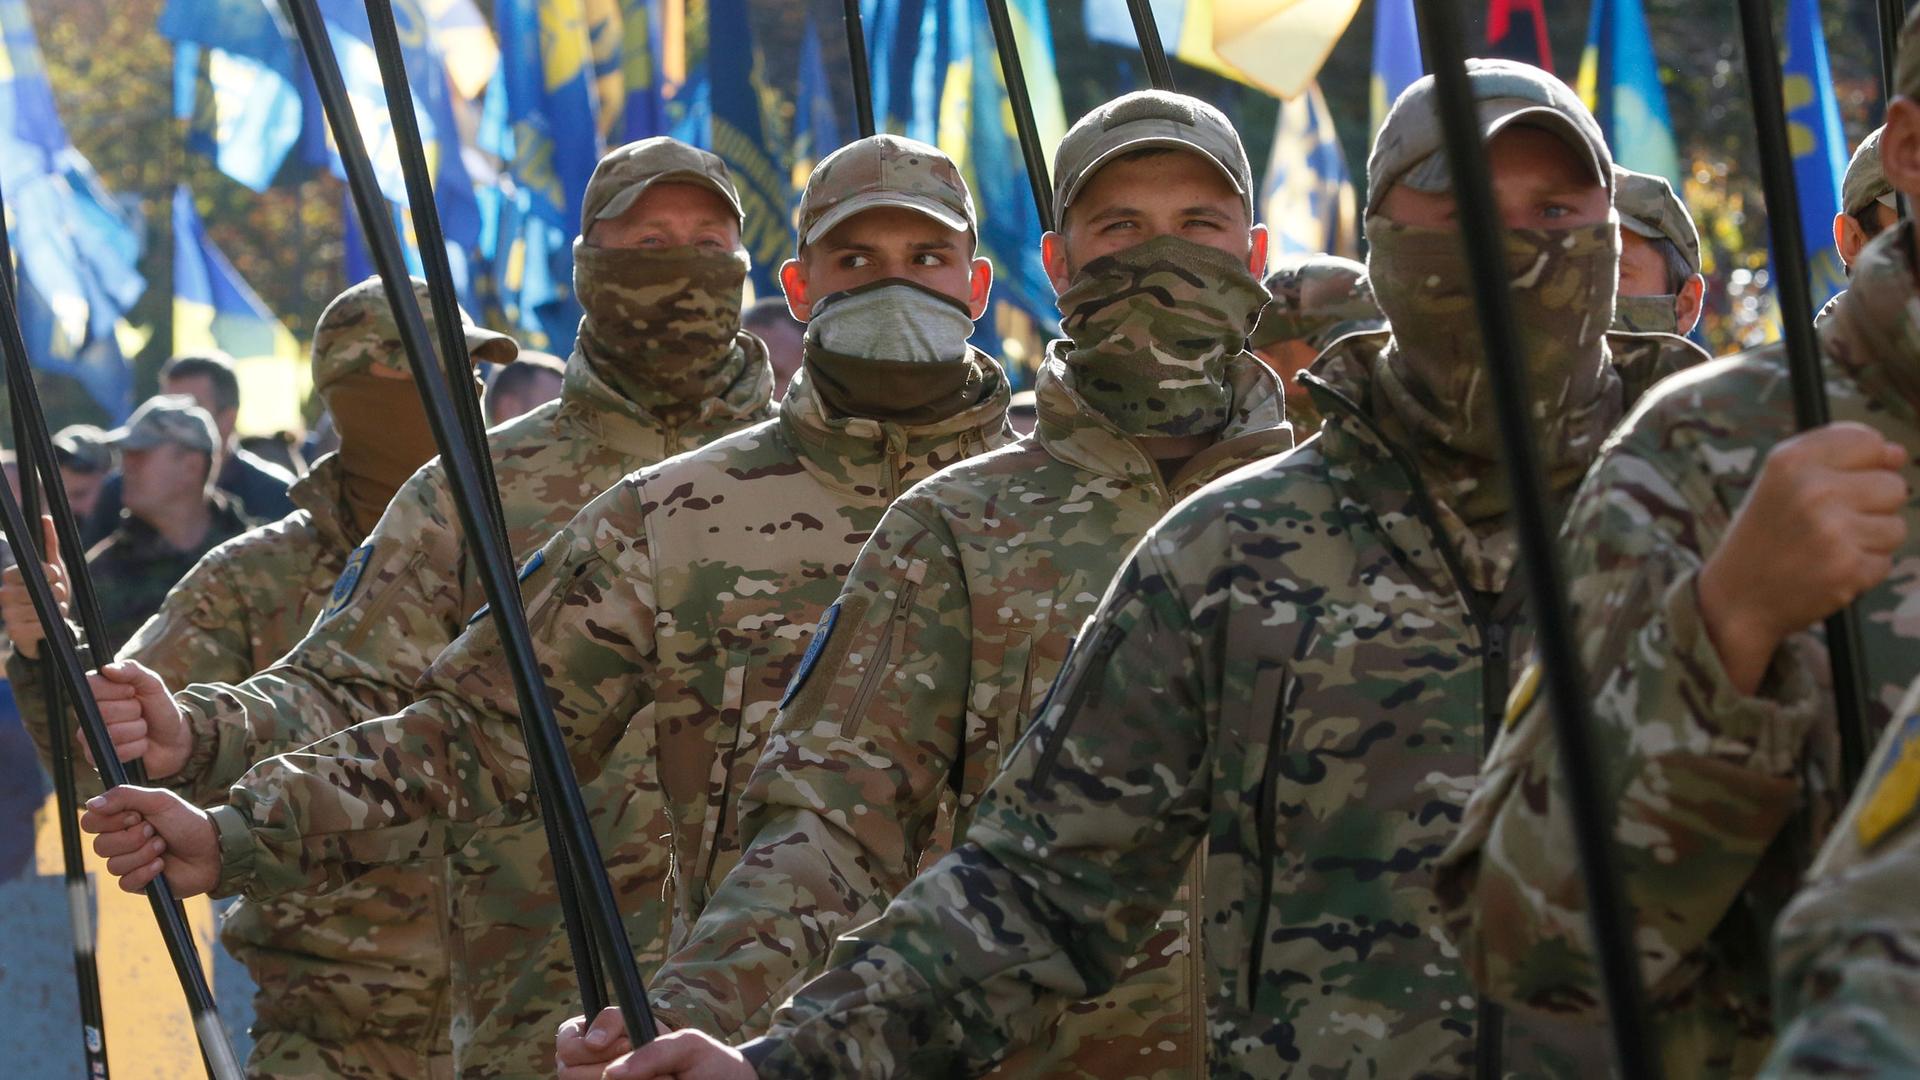 A line of men are shown wearing Ukrainian military fatigues and holding flag poles.